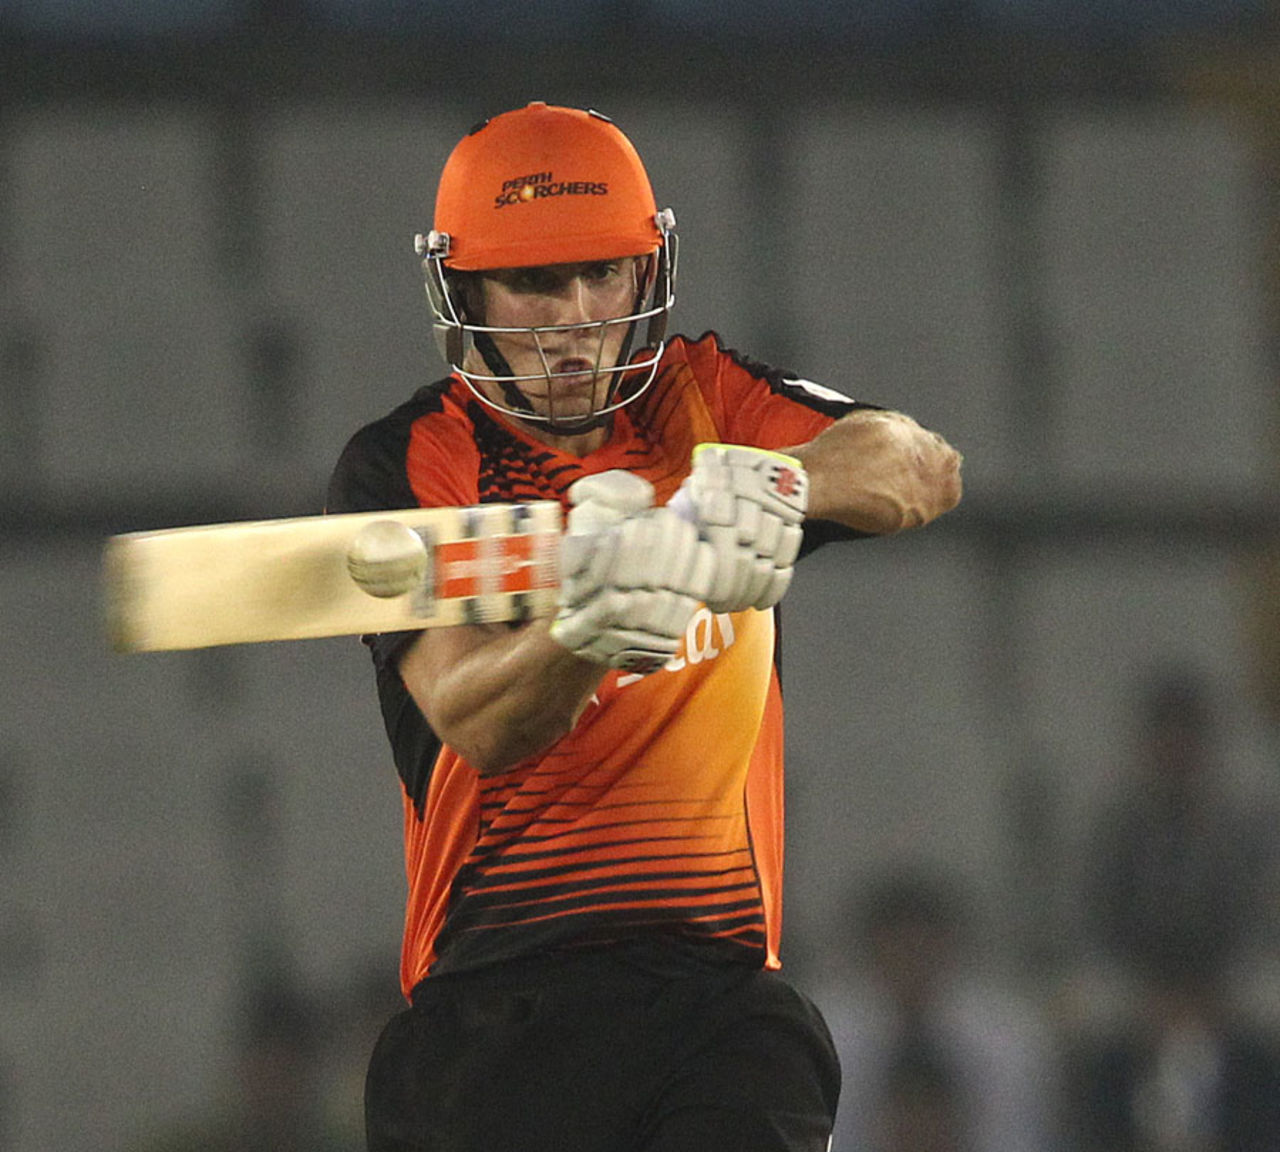 Mitchell Marsh was the hero for Perth Scorchers, Dolphins v Perth Scorchers, Champions League T20, Mohali, September 20, 2014